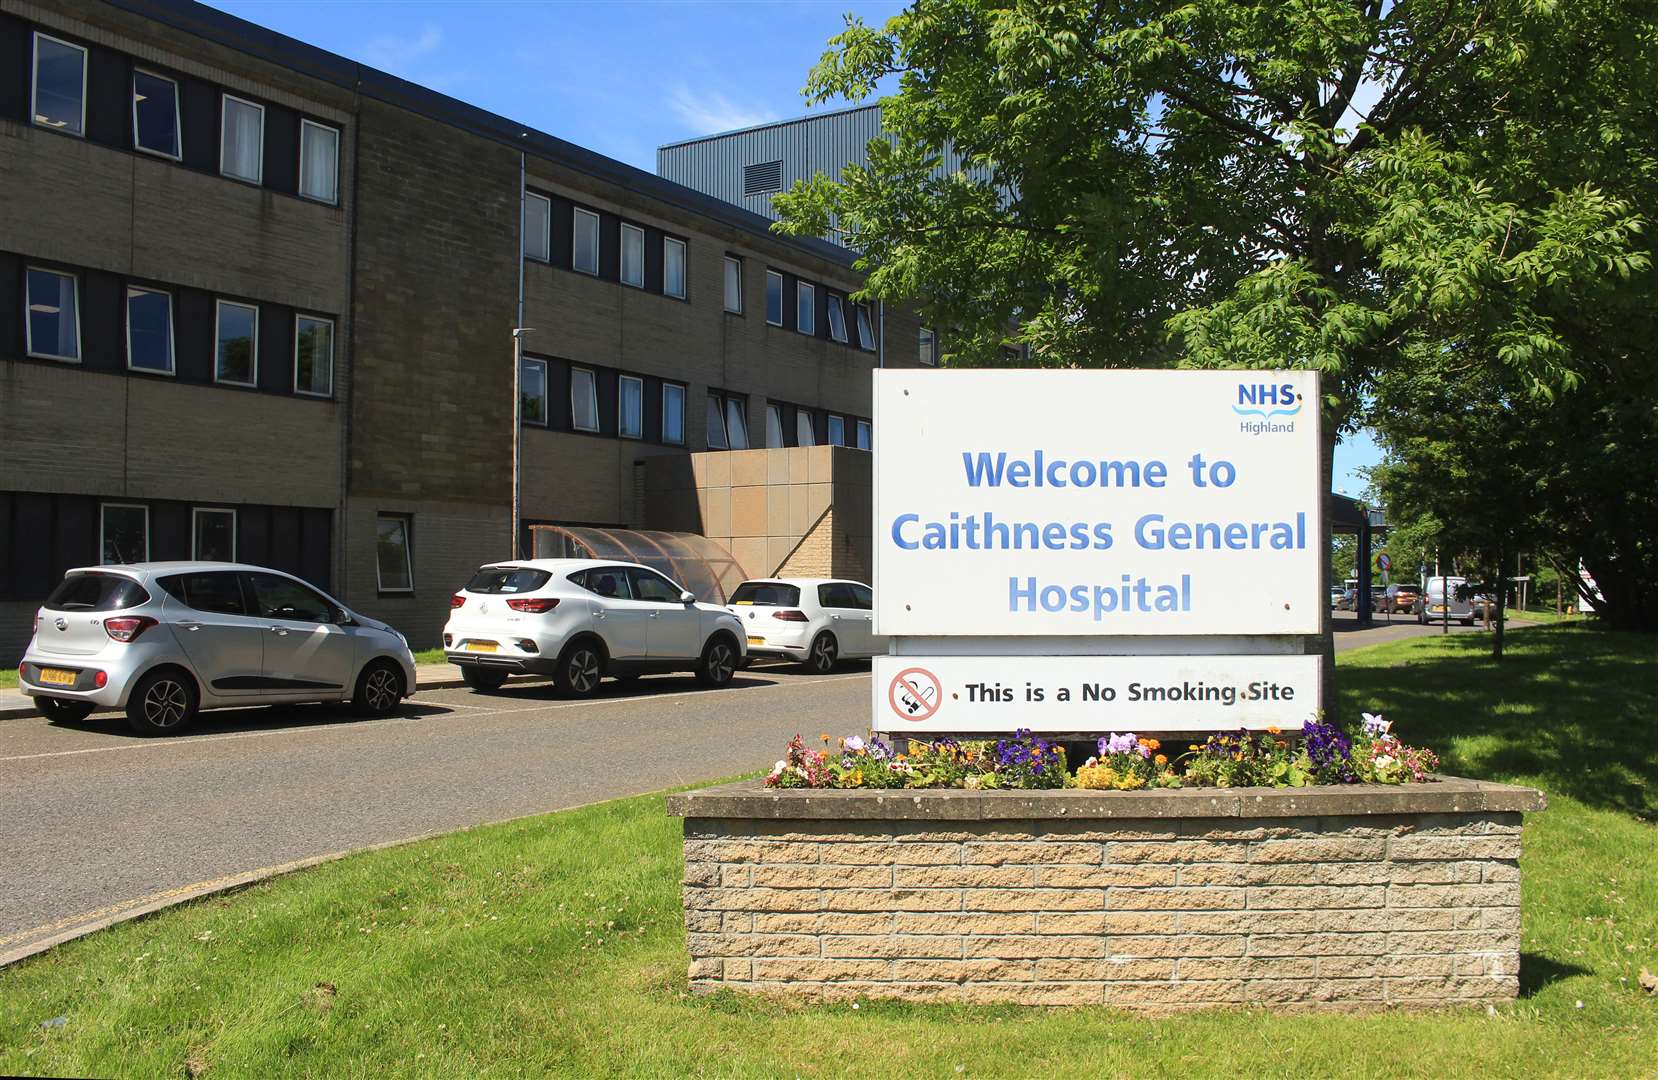 A number of patients have tested positive for Covid at Caithness General Hospital.